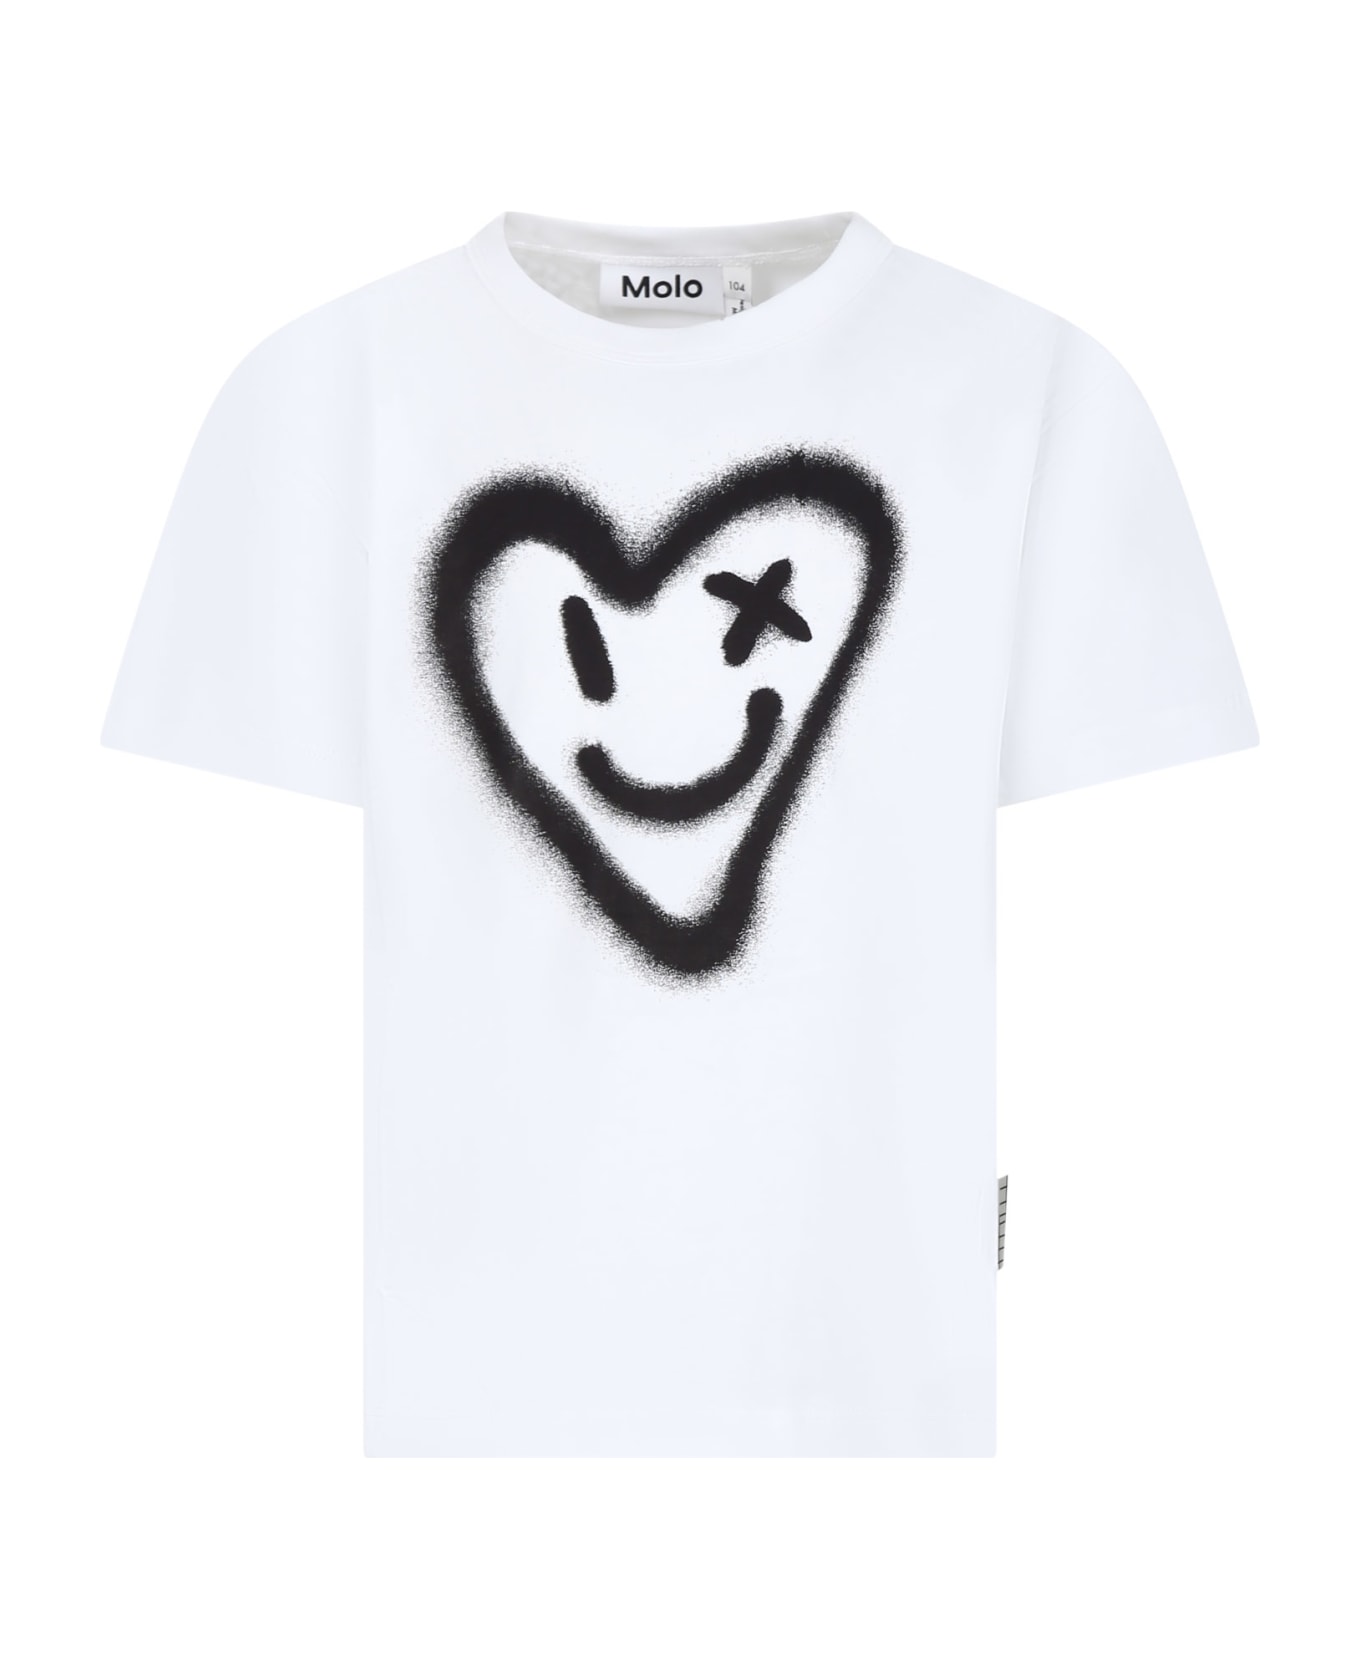 Molo White T-shirt For Boy With Heart - White